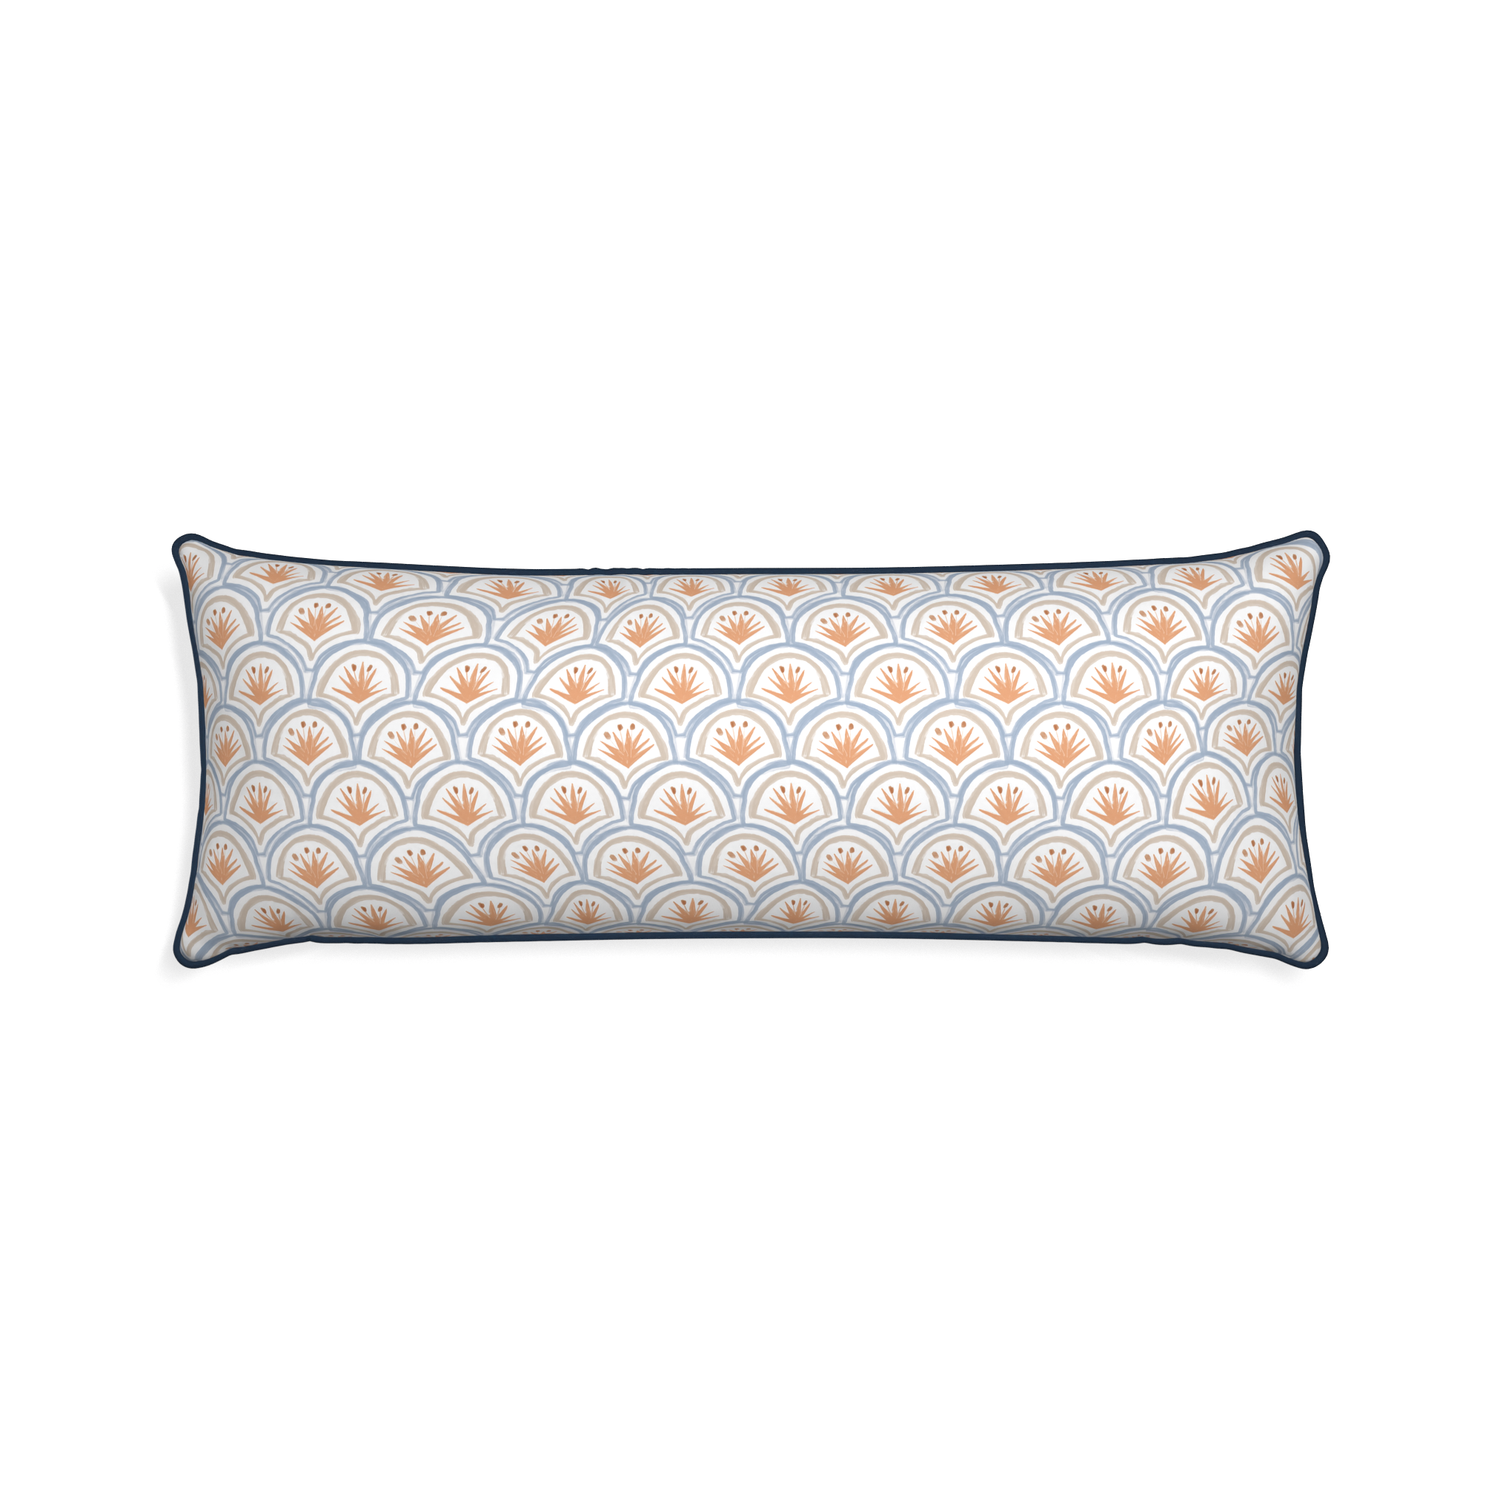 Xl-lumbar thatcher apricot custom art deco palm patternpillow with c piping on white background